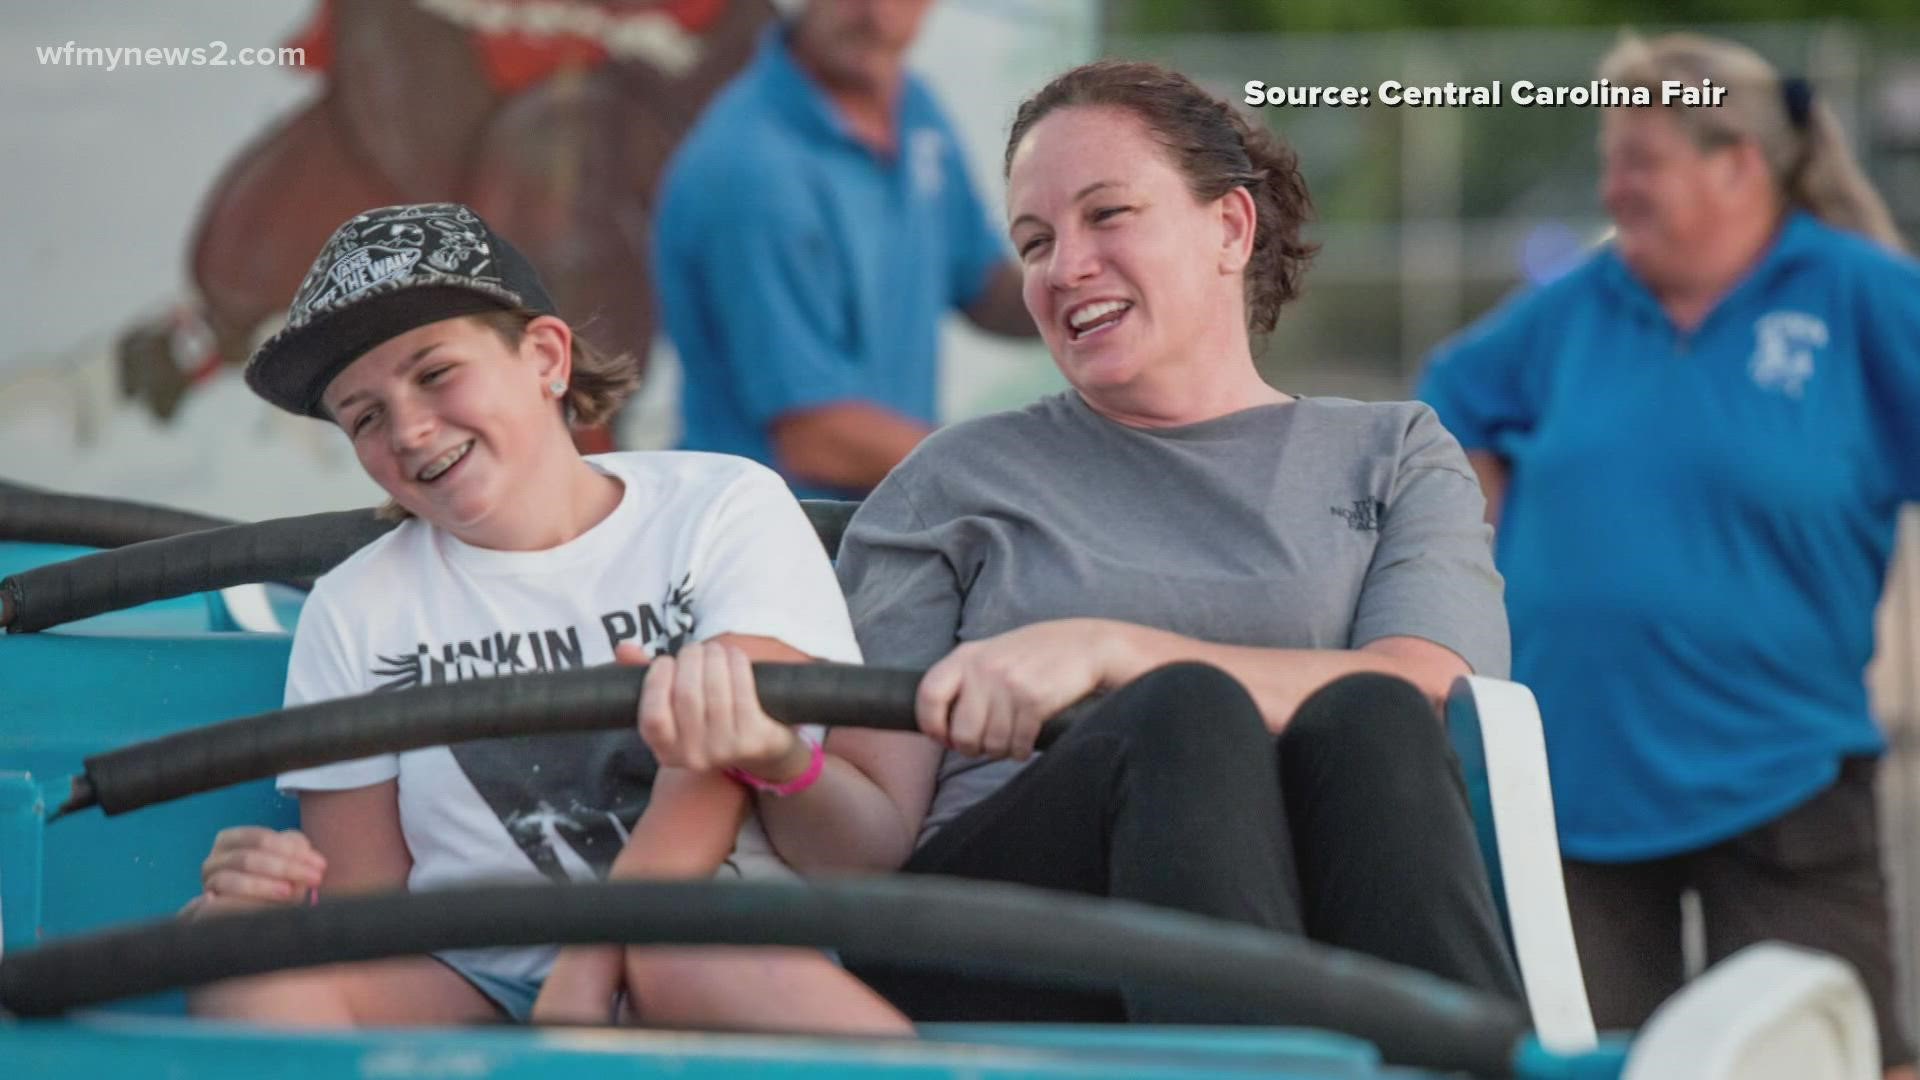 The annual fair opens its gates Friday, a year after it was canceled due to COVID-19.